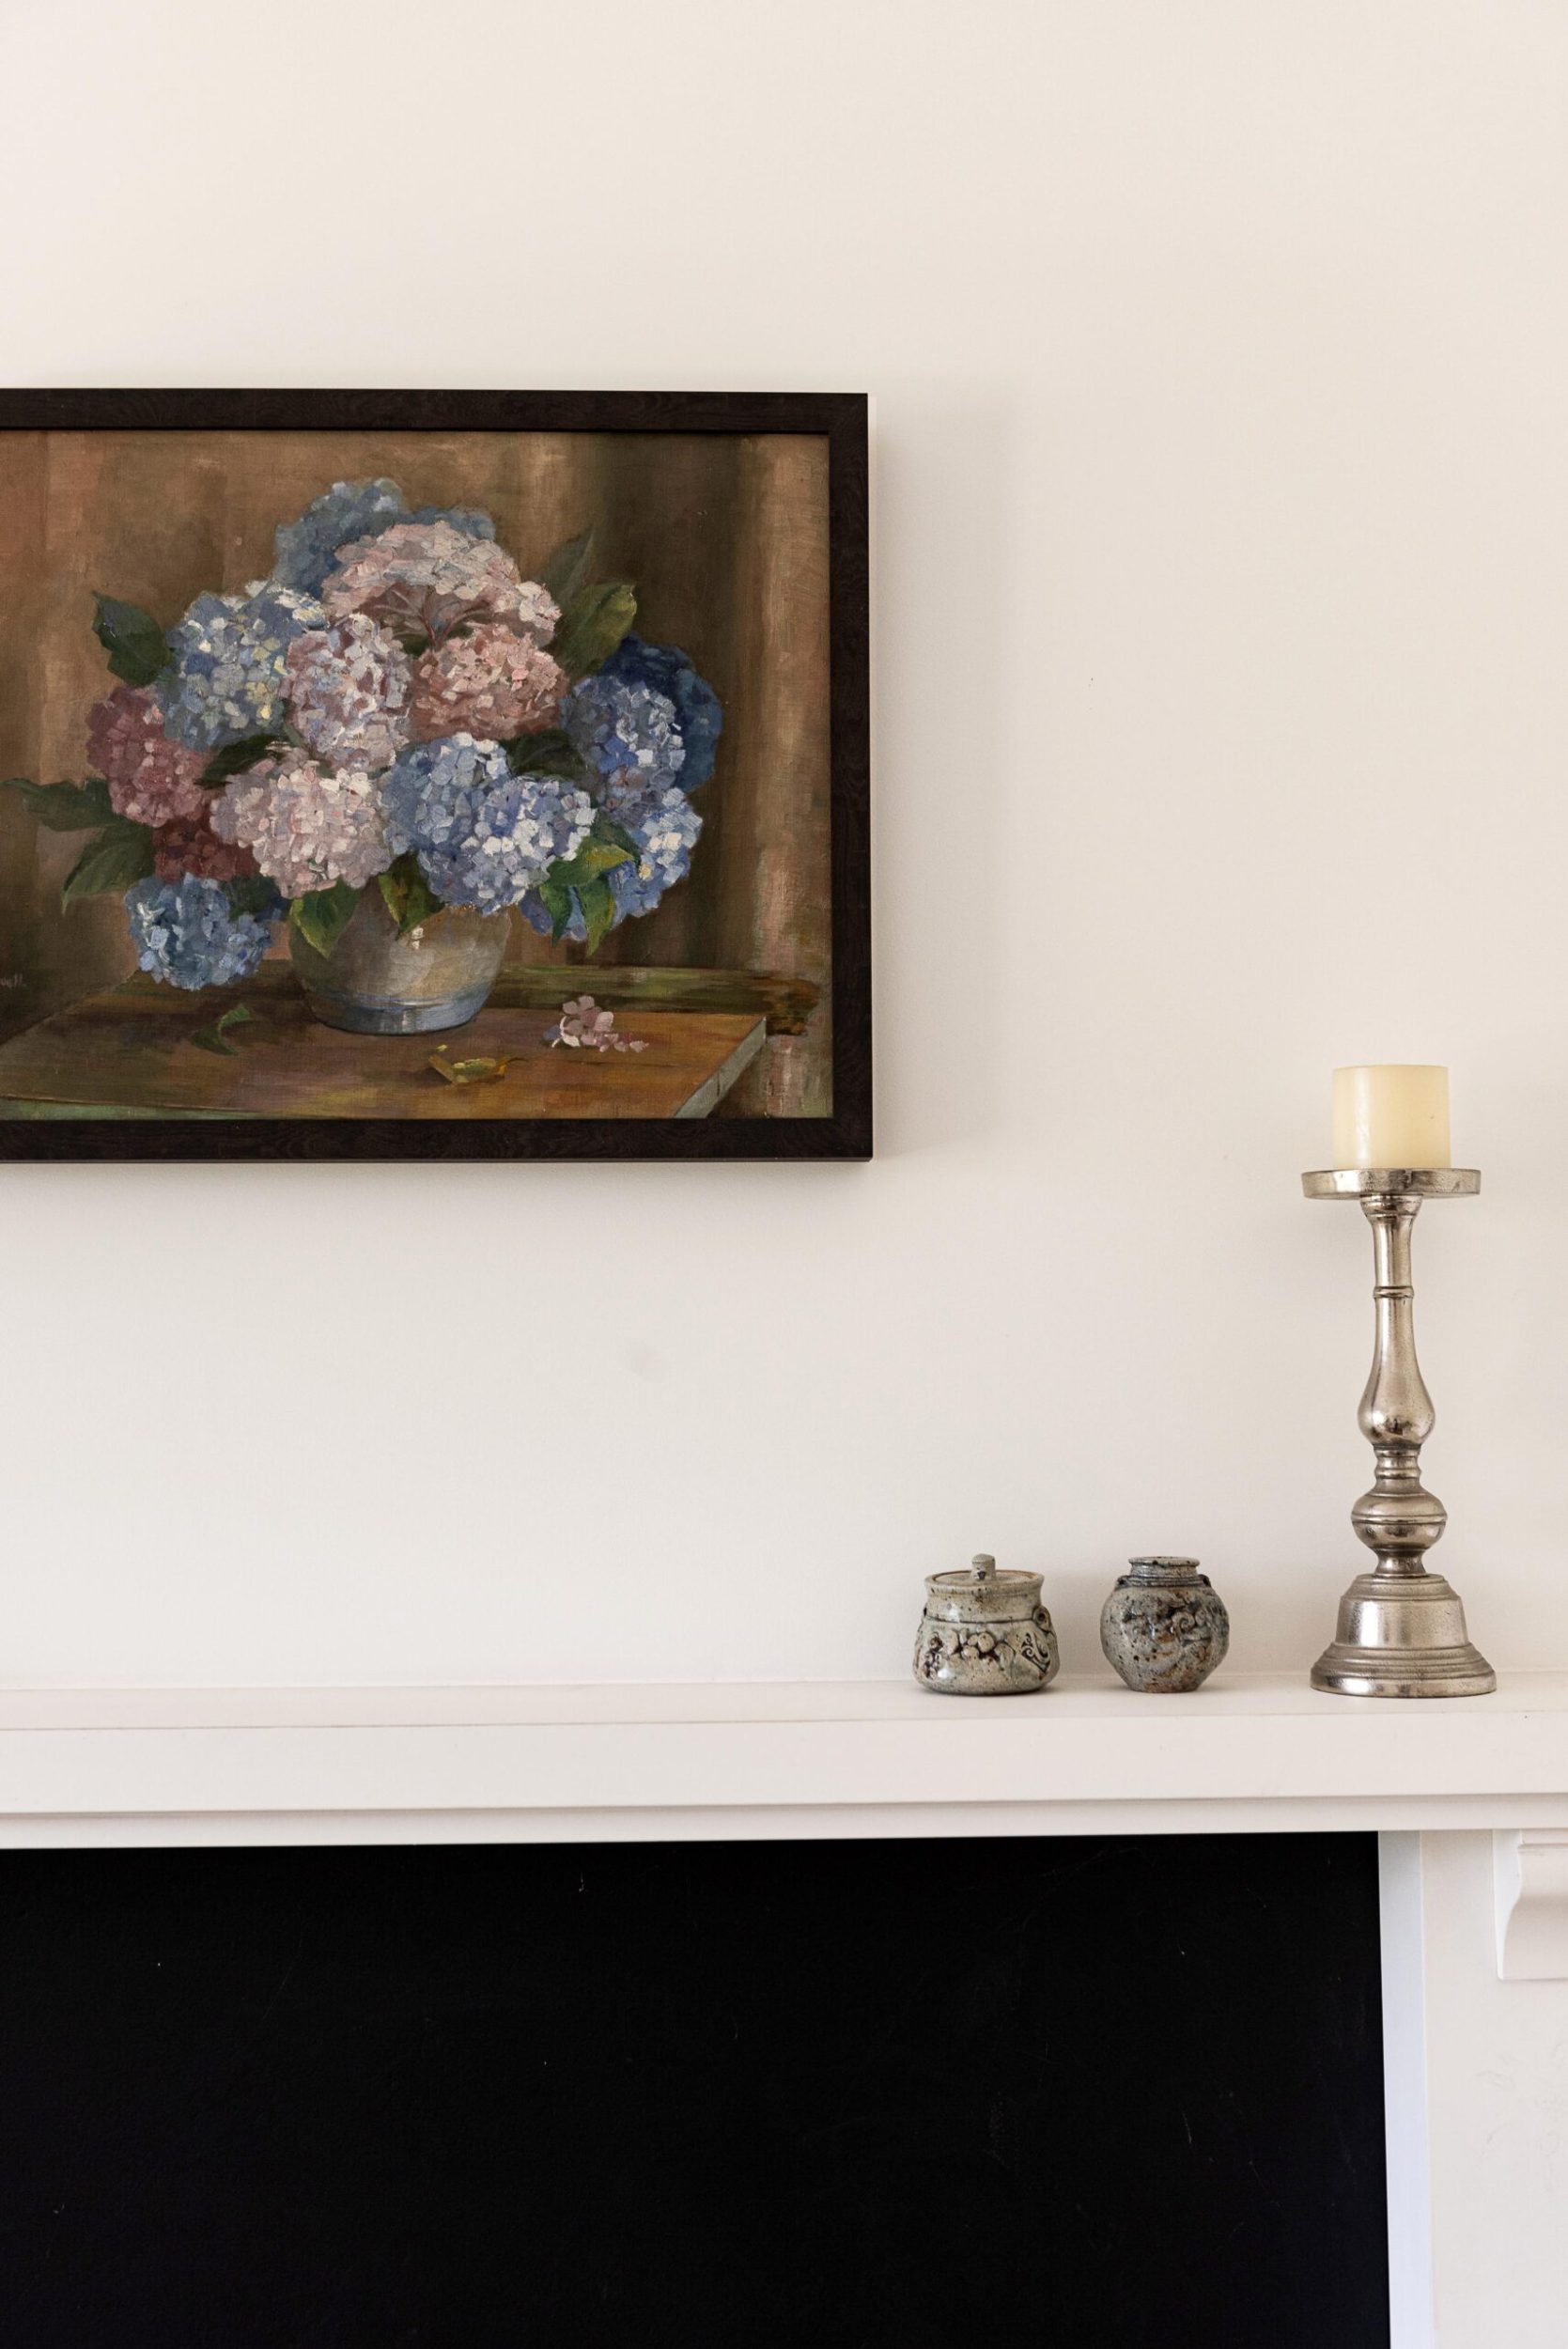 A white wall with a black fireplace, a floral hanging artwork and silver vintage candle holder